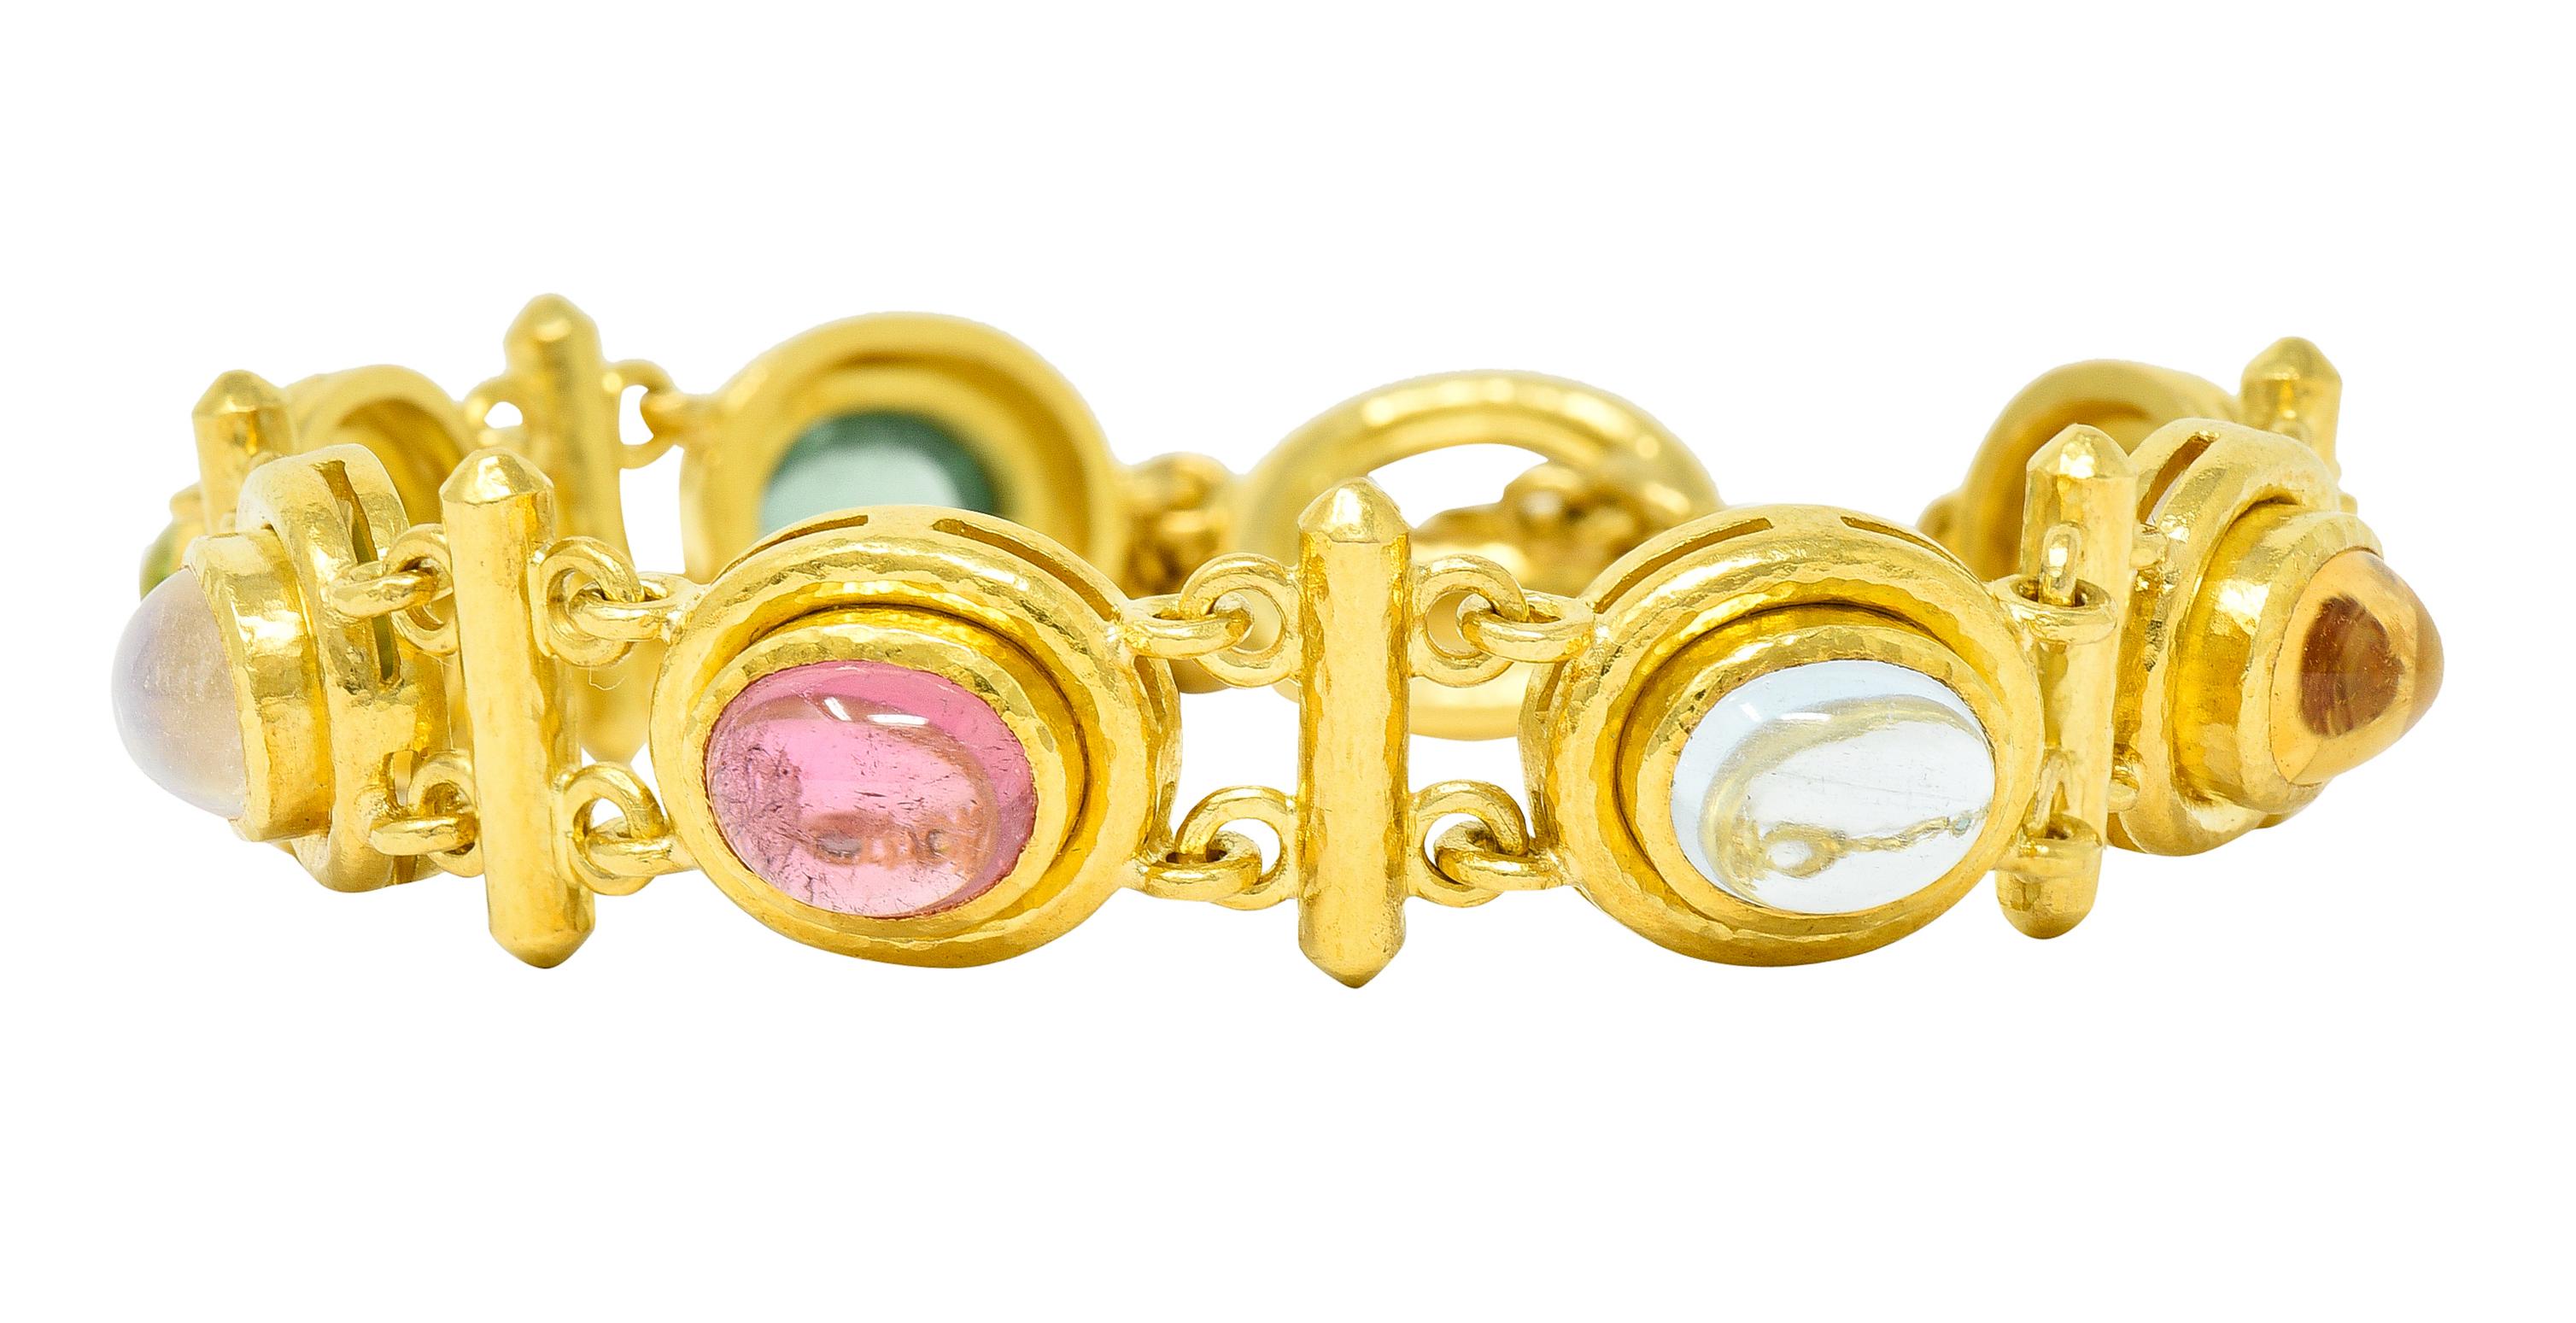 Bracelet is comprised of bezel set links alternating with bar spacer links

Featuring oval cabochons of tourmaline, citrine, moonstone, labradorite, peridot and other

With a hammered gold finish throughout

Completed by a toggle style clasp -